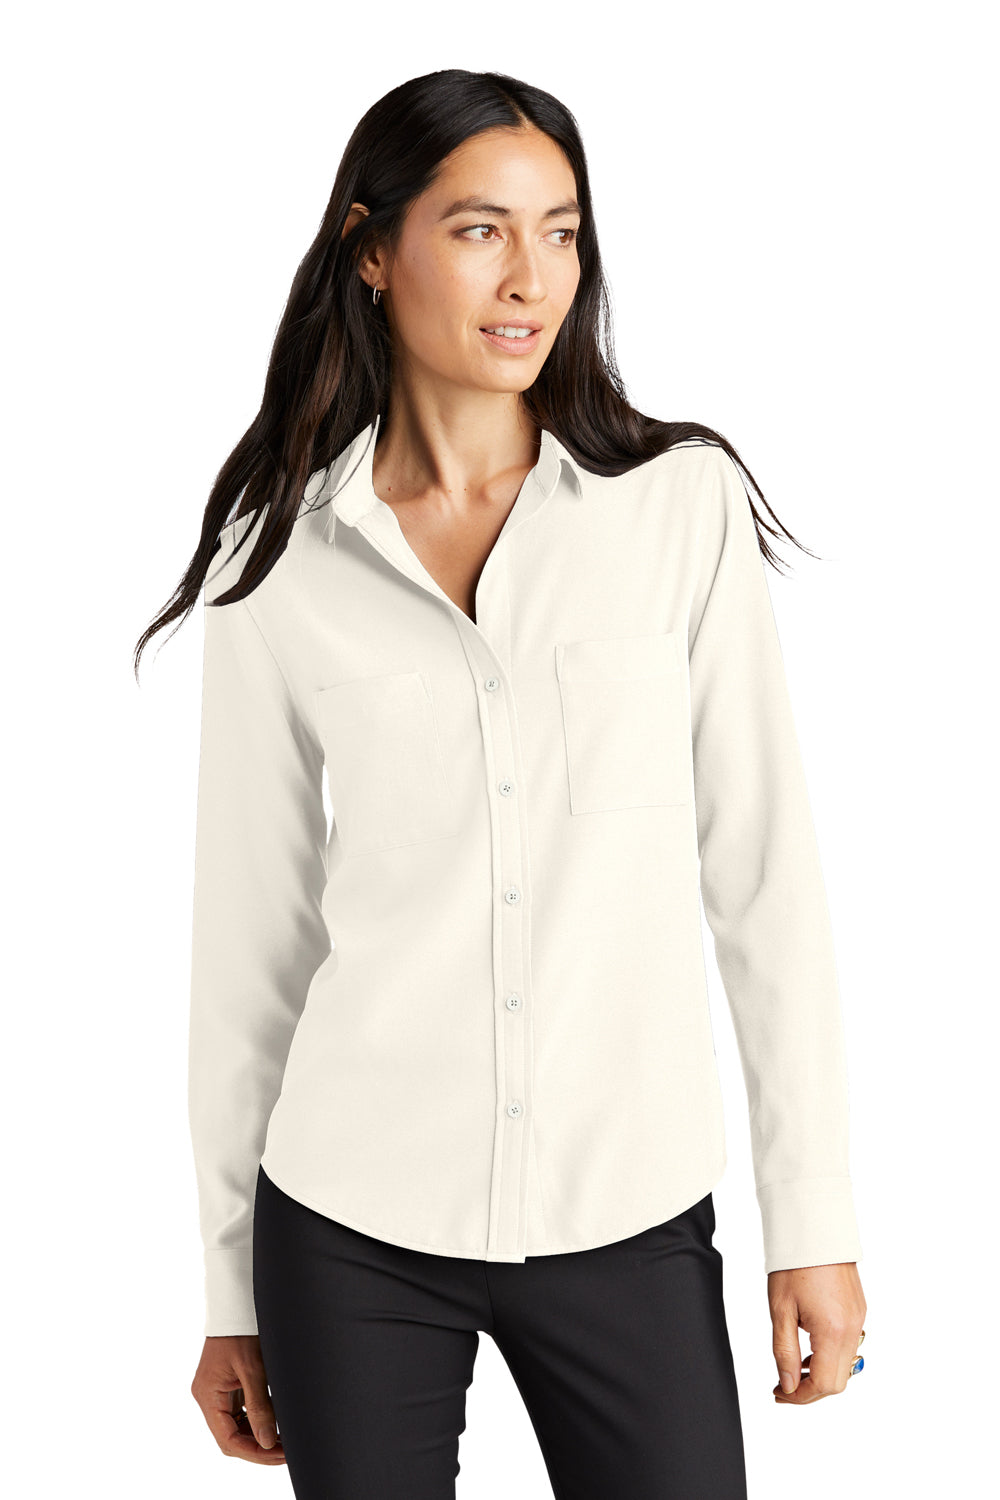 Mercer+Mettle MM2013 Stretch Crepe Long Sleeve Button Down Shirt Ivory Chiffon White Front